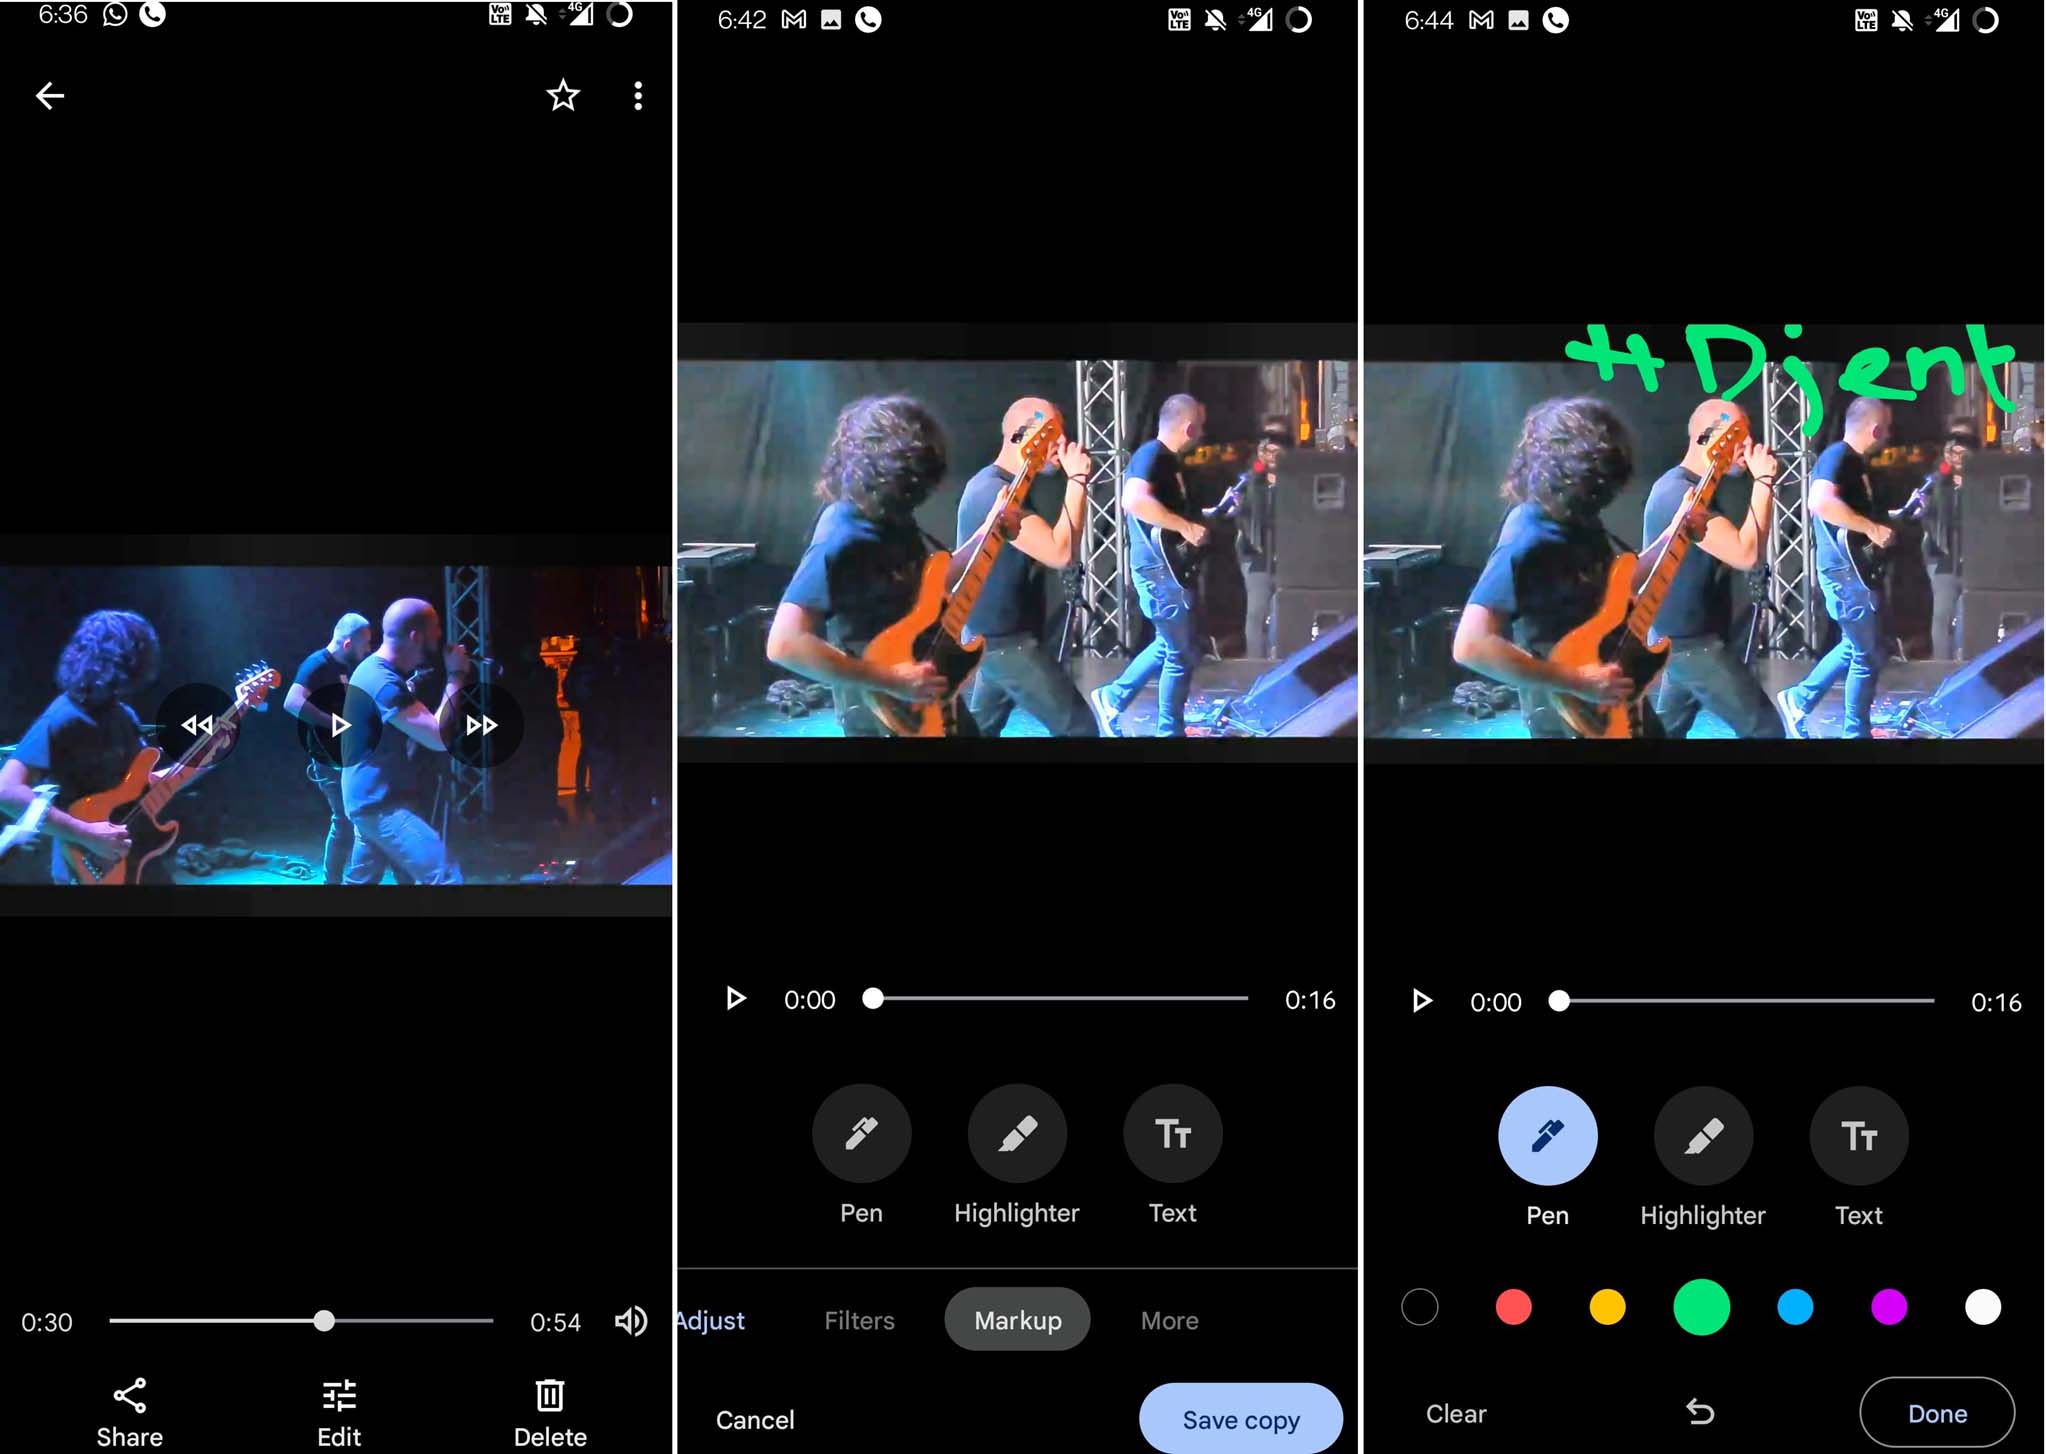 how to write or draw on a video in google photos